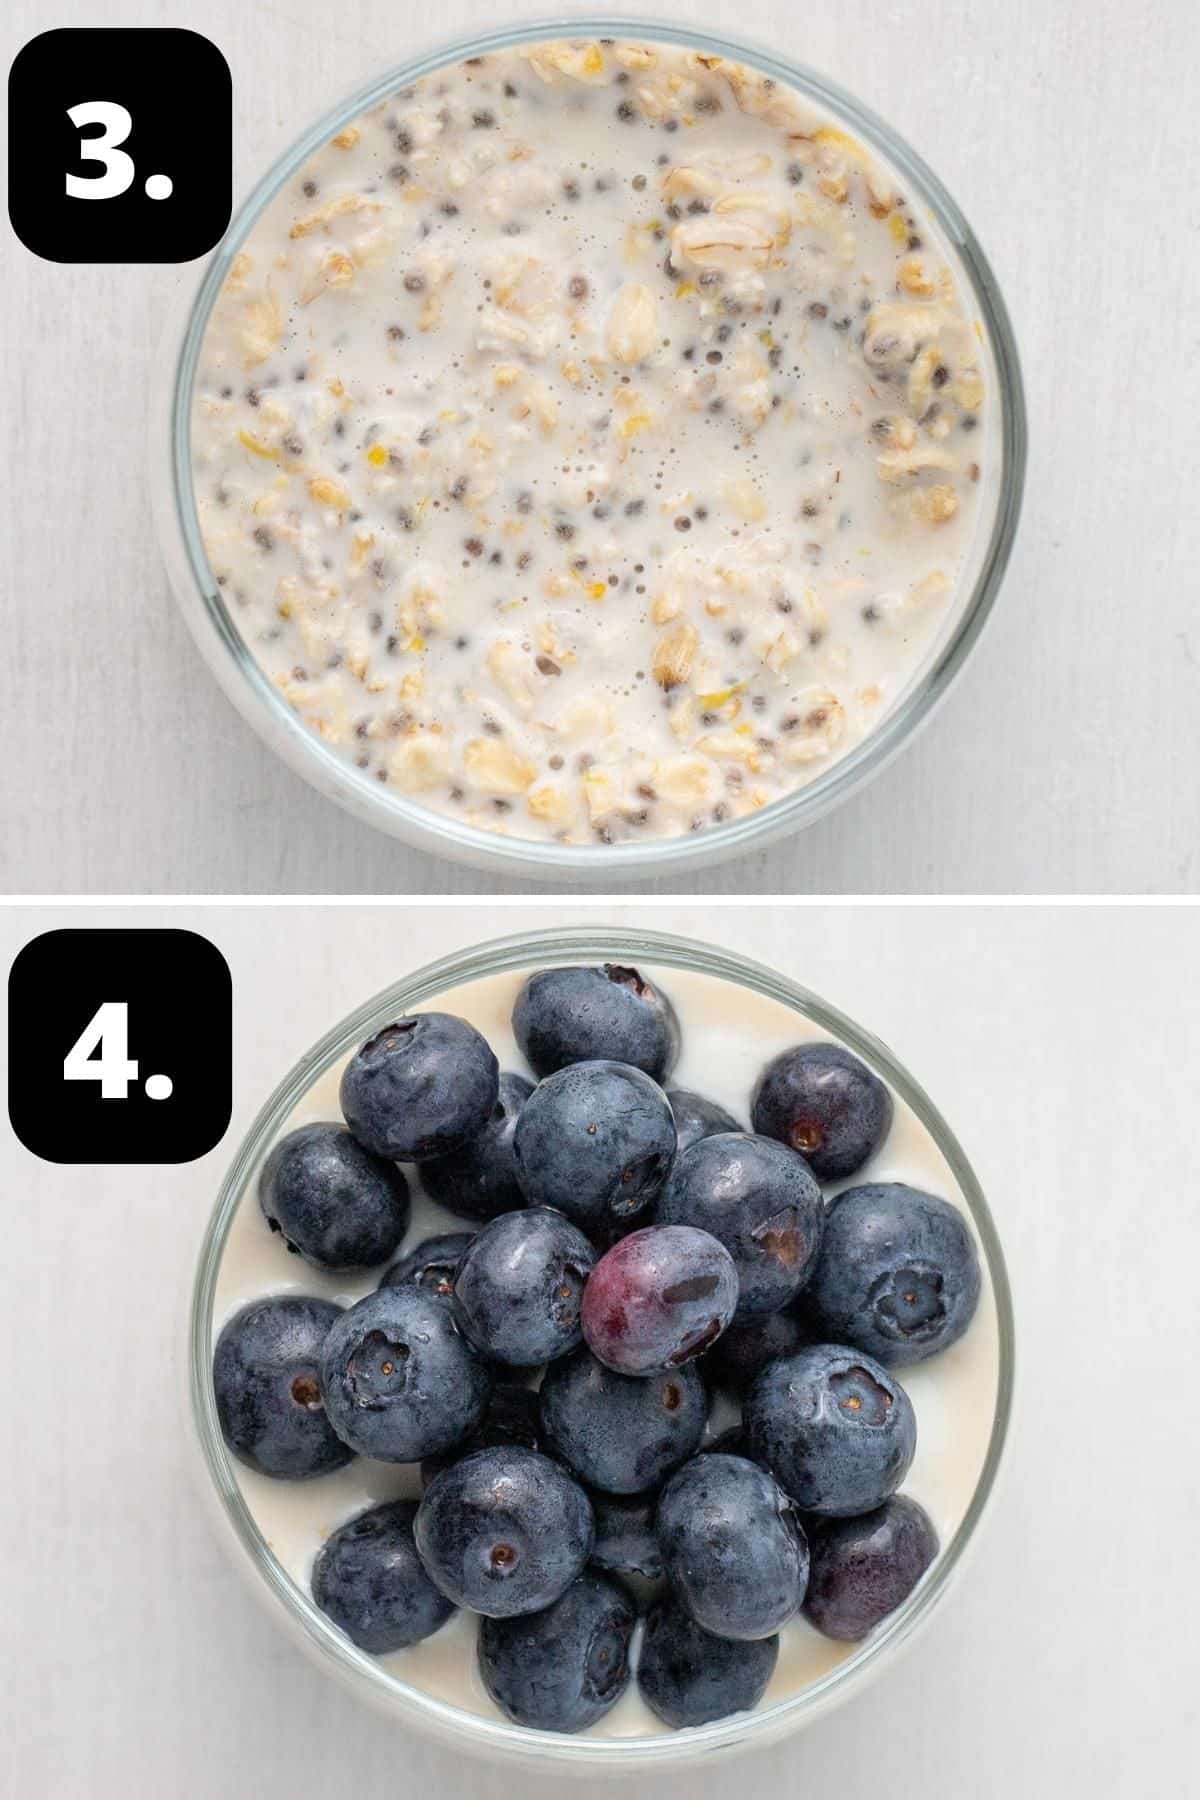 Steps 3-4 of preparing this recipe - the oat mixture in a jar and a serving topped with blueberries.